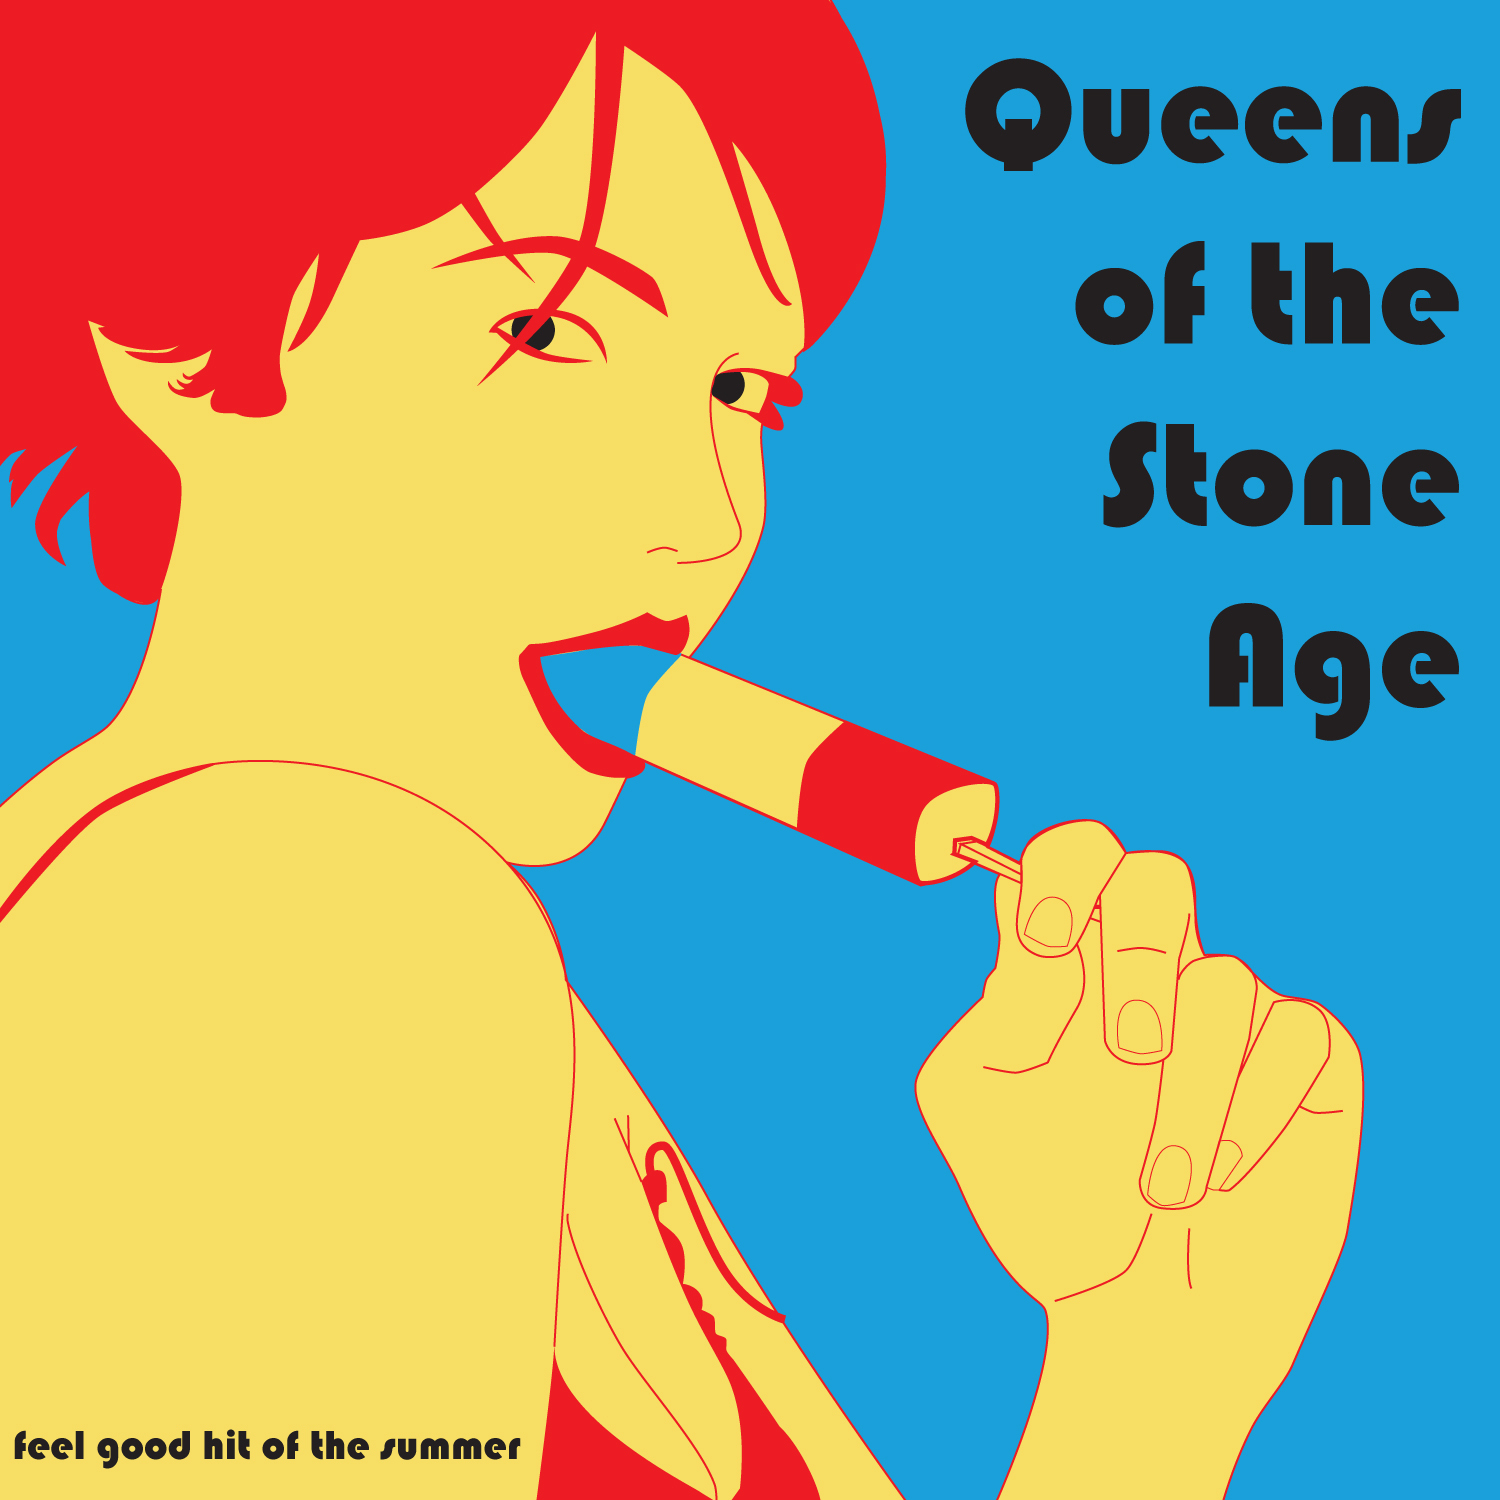 feel good hit of the summer   Queens of the Stone Age Fan